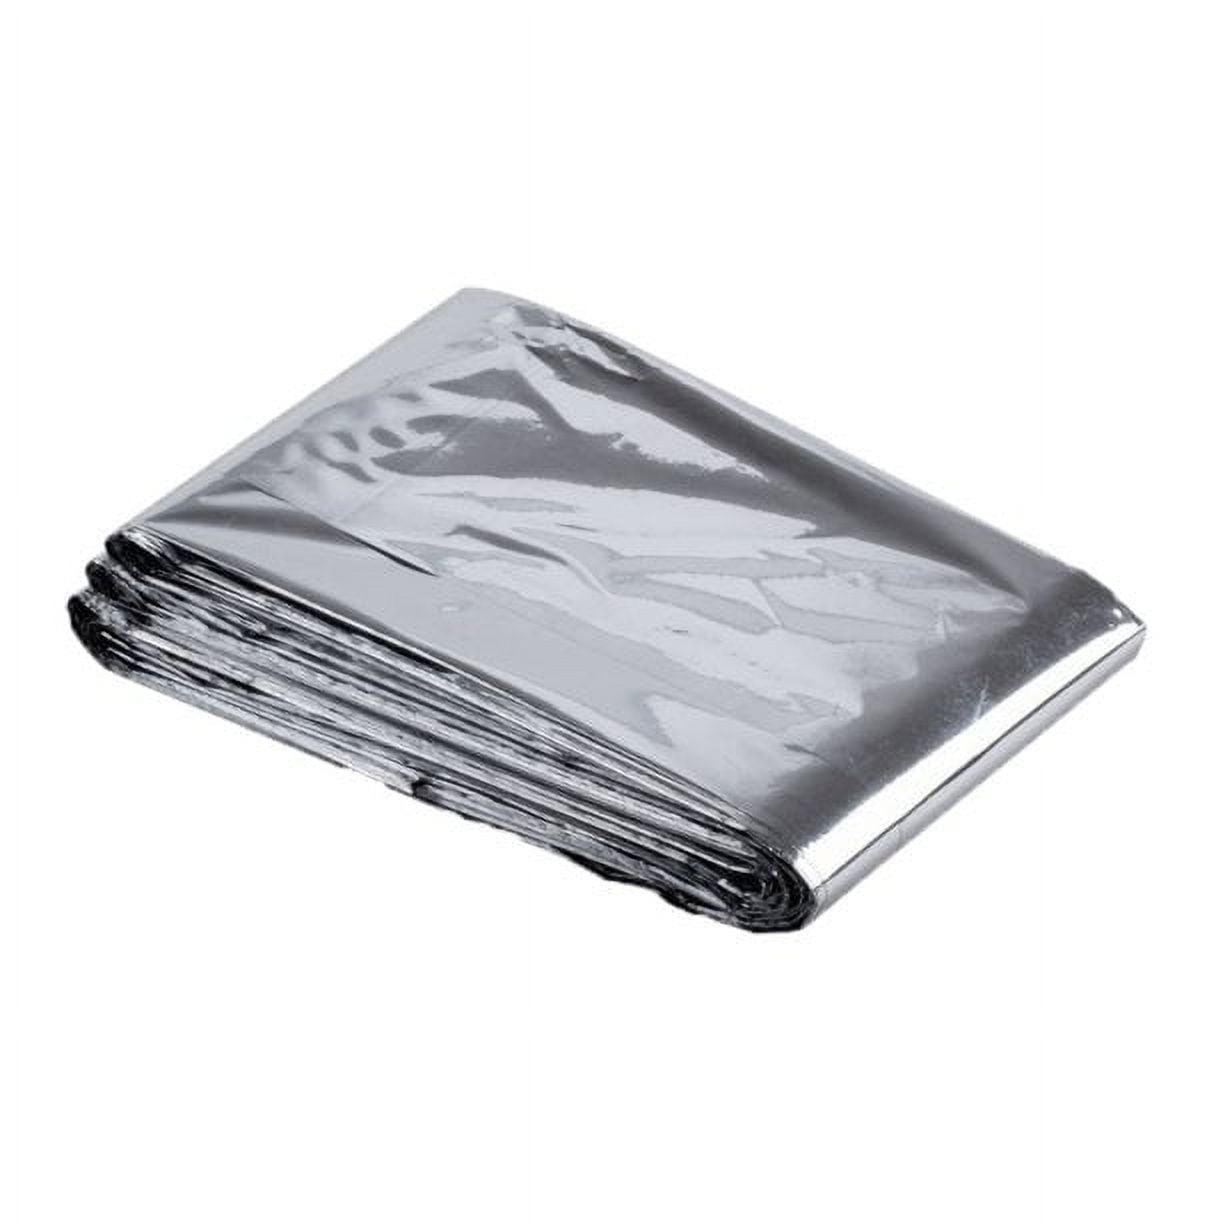 Insulating Blanket Practical Protection Mylar Survival Blanket Compact